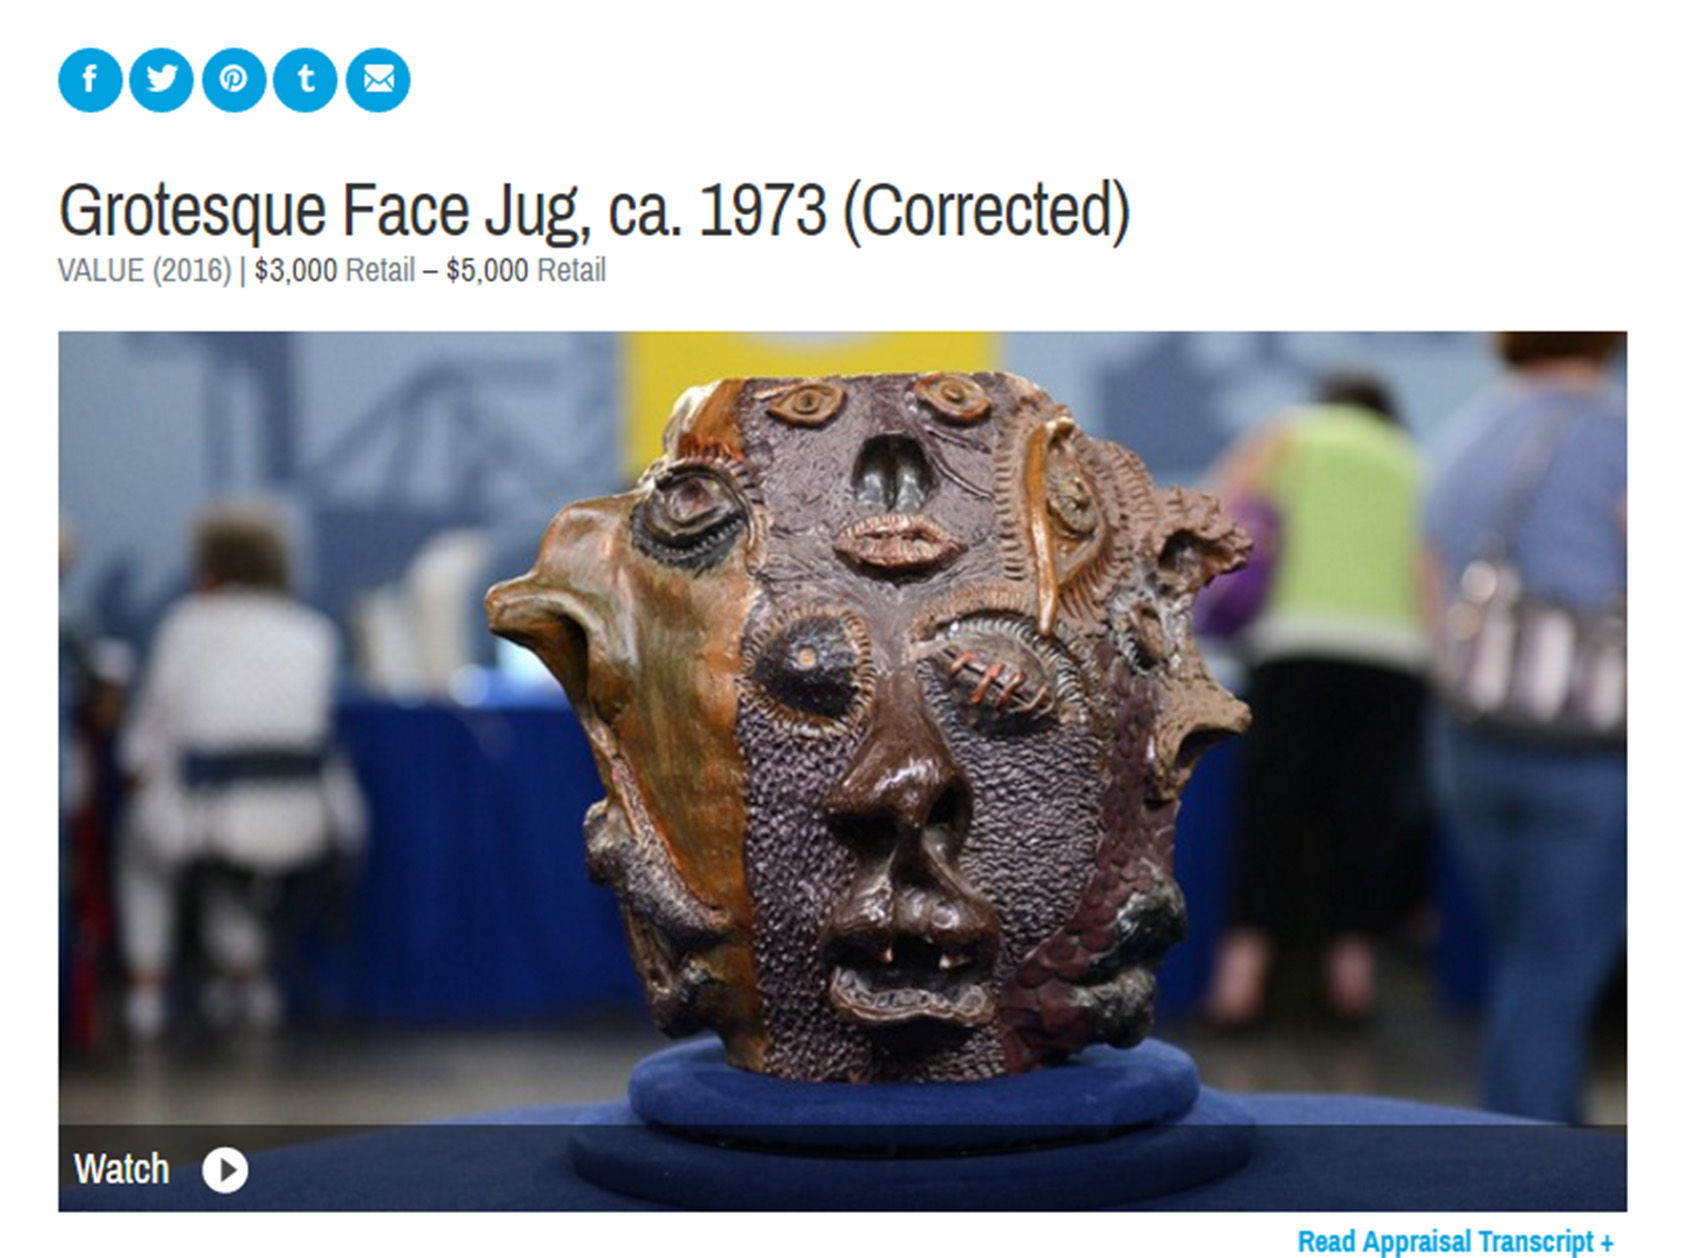 A screen capture from the “Antiques Roadshow” website shows the “Grotesque Face Jug.”